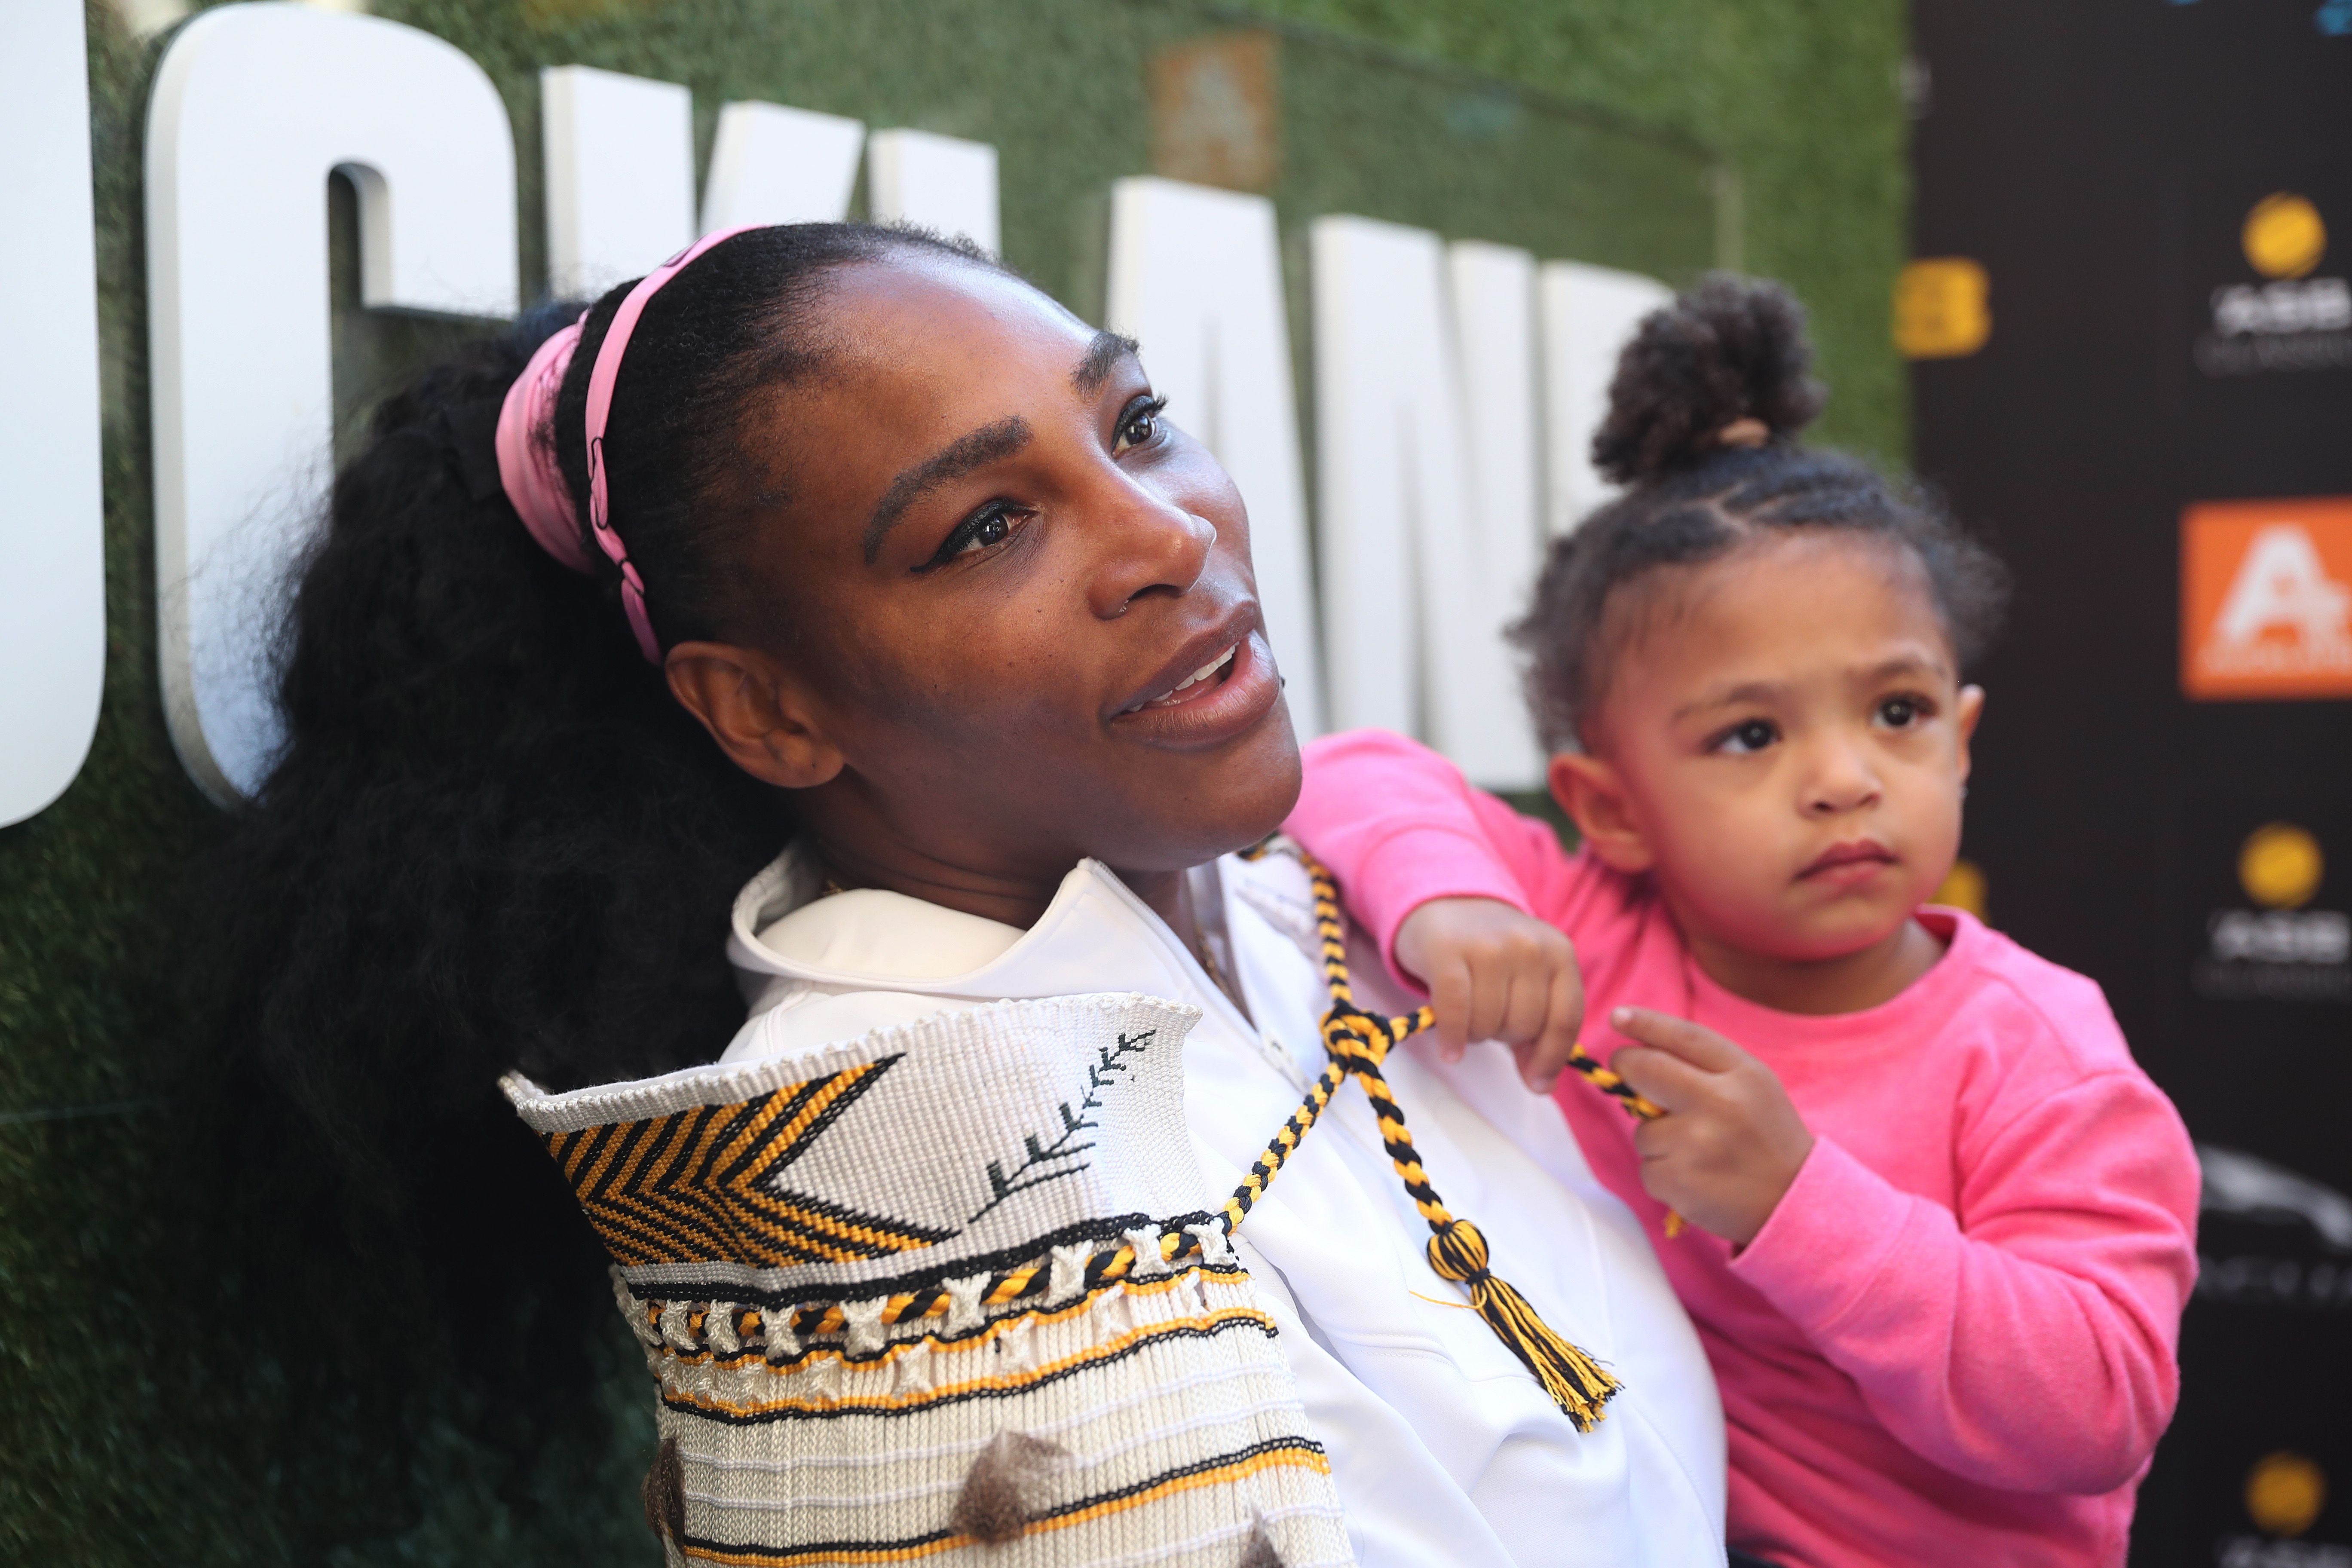 Tennis player Serena Williams holders her daughter Olympia